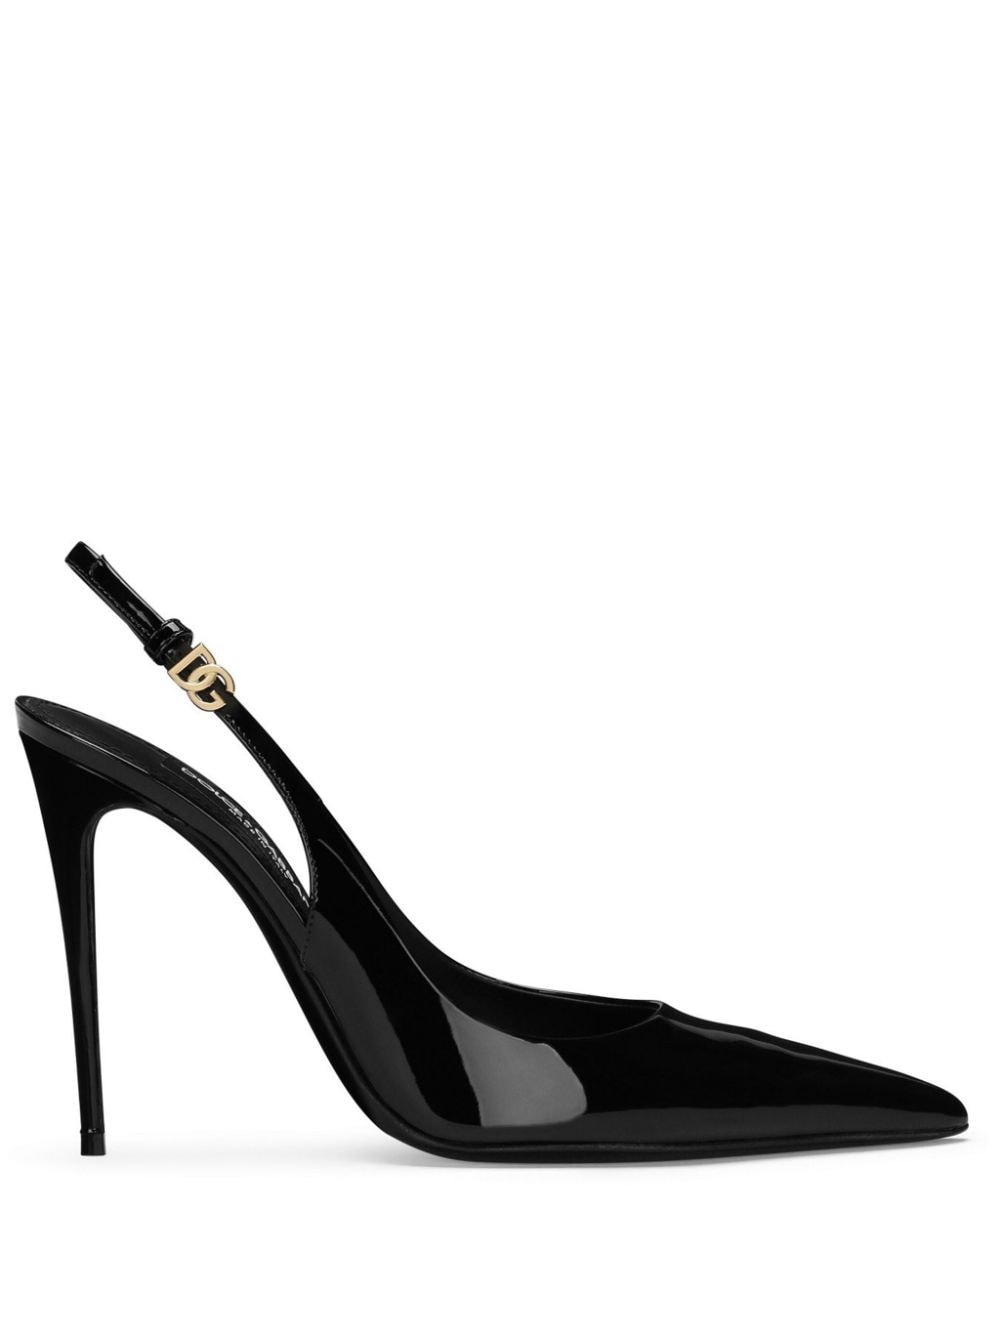 Image 1 of Dolce & Gabbana patent-leather slingback pumps